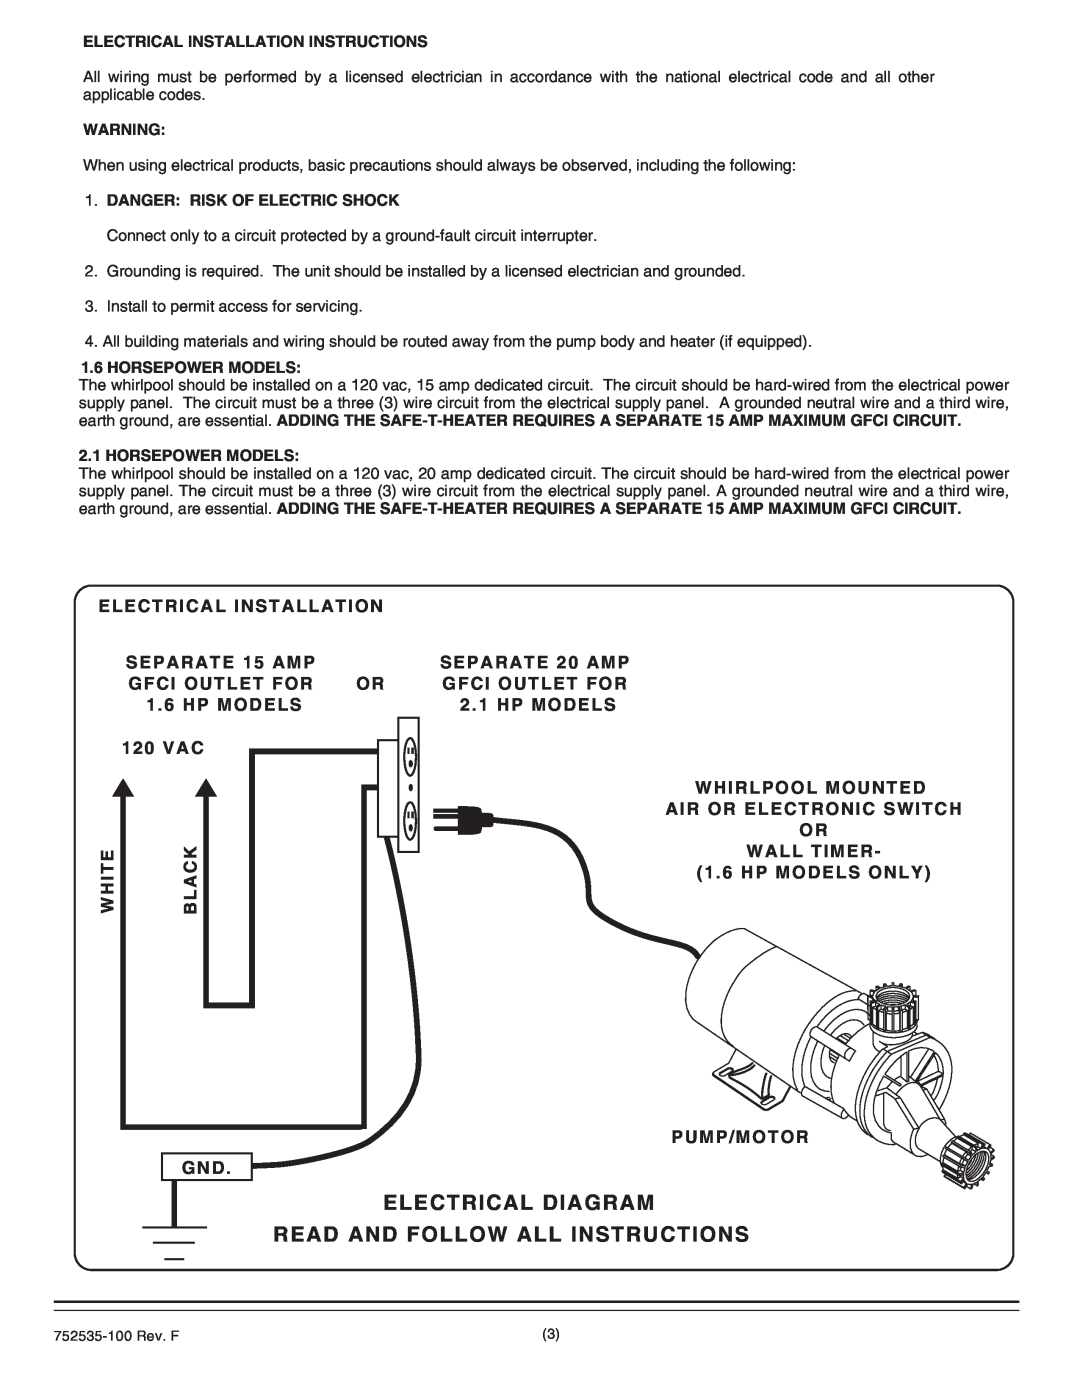 American Standard 2908.XXXW Electrical Diagram Read And Follow All Instructions, Electrical Installation Instructions 